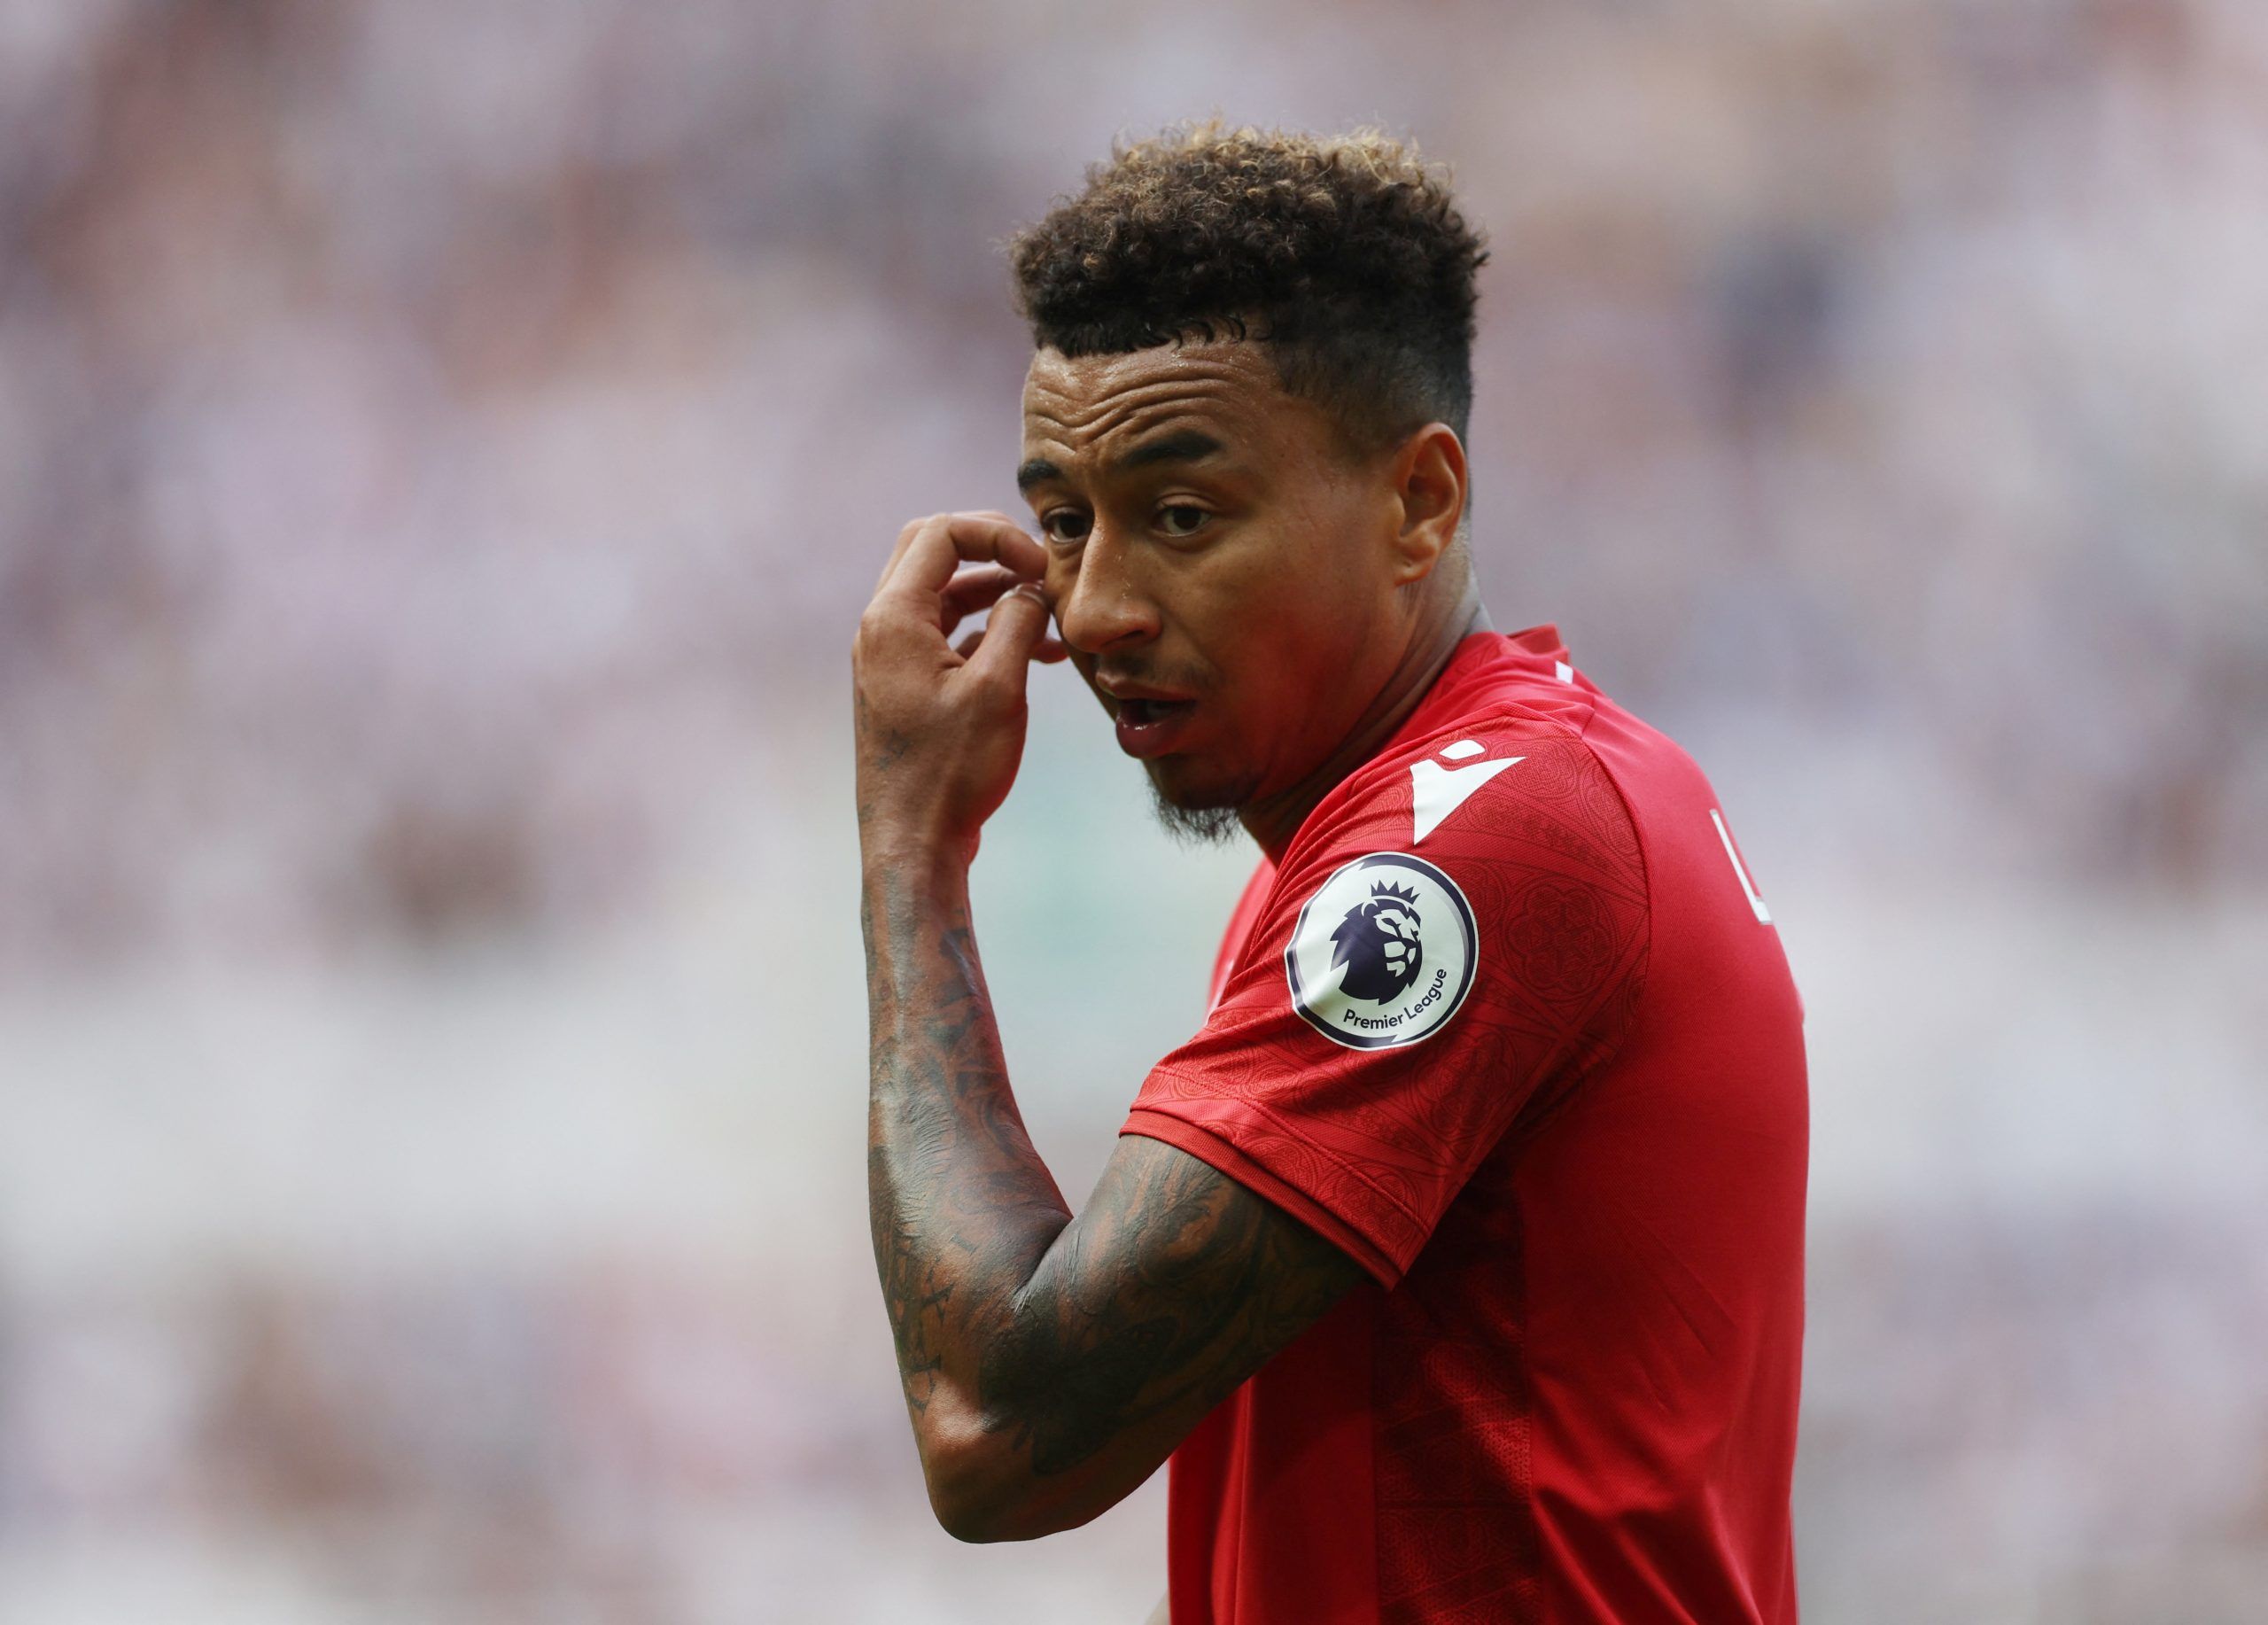 Premier League, Nottingham Forest, NFFC, Newcastle United vs Nottingham Forest, Jesse Lingard, NFFC, NFFC news, NFFC latest news, NFFC news, NFFC update, Cooper, The City Ground